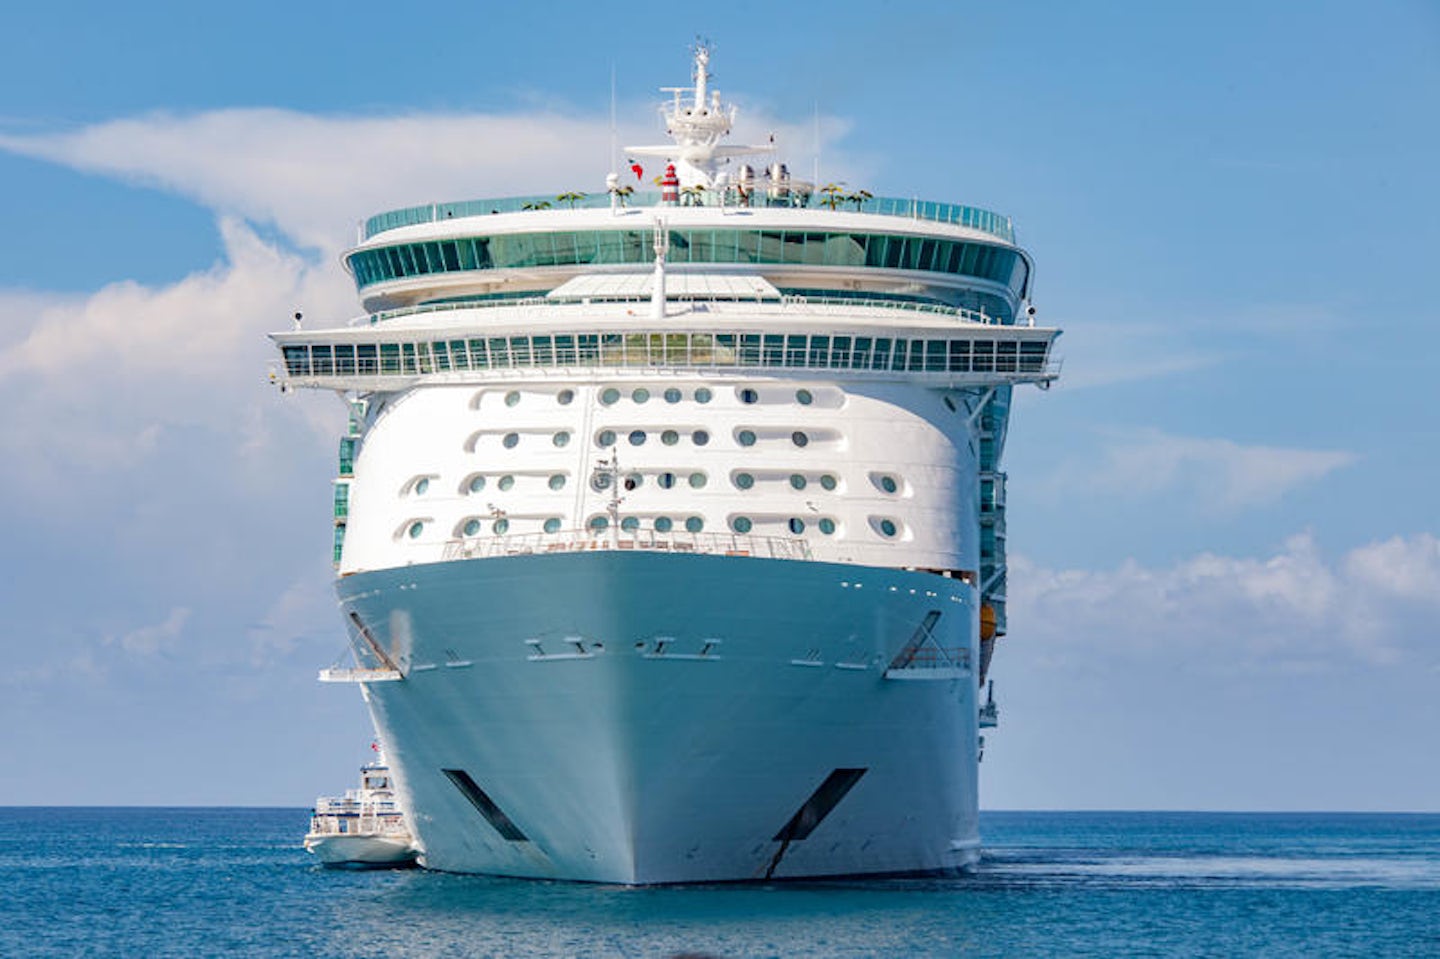 Ship Exteriors on Mariner of the Seas